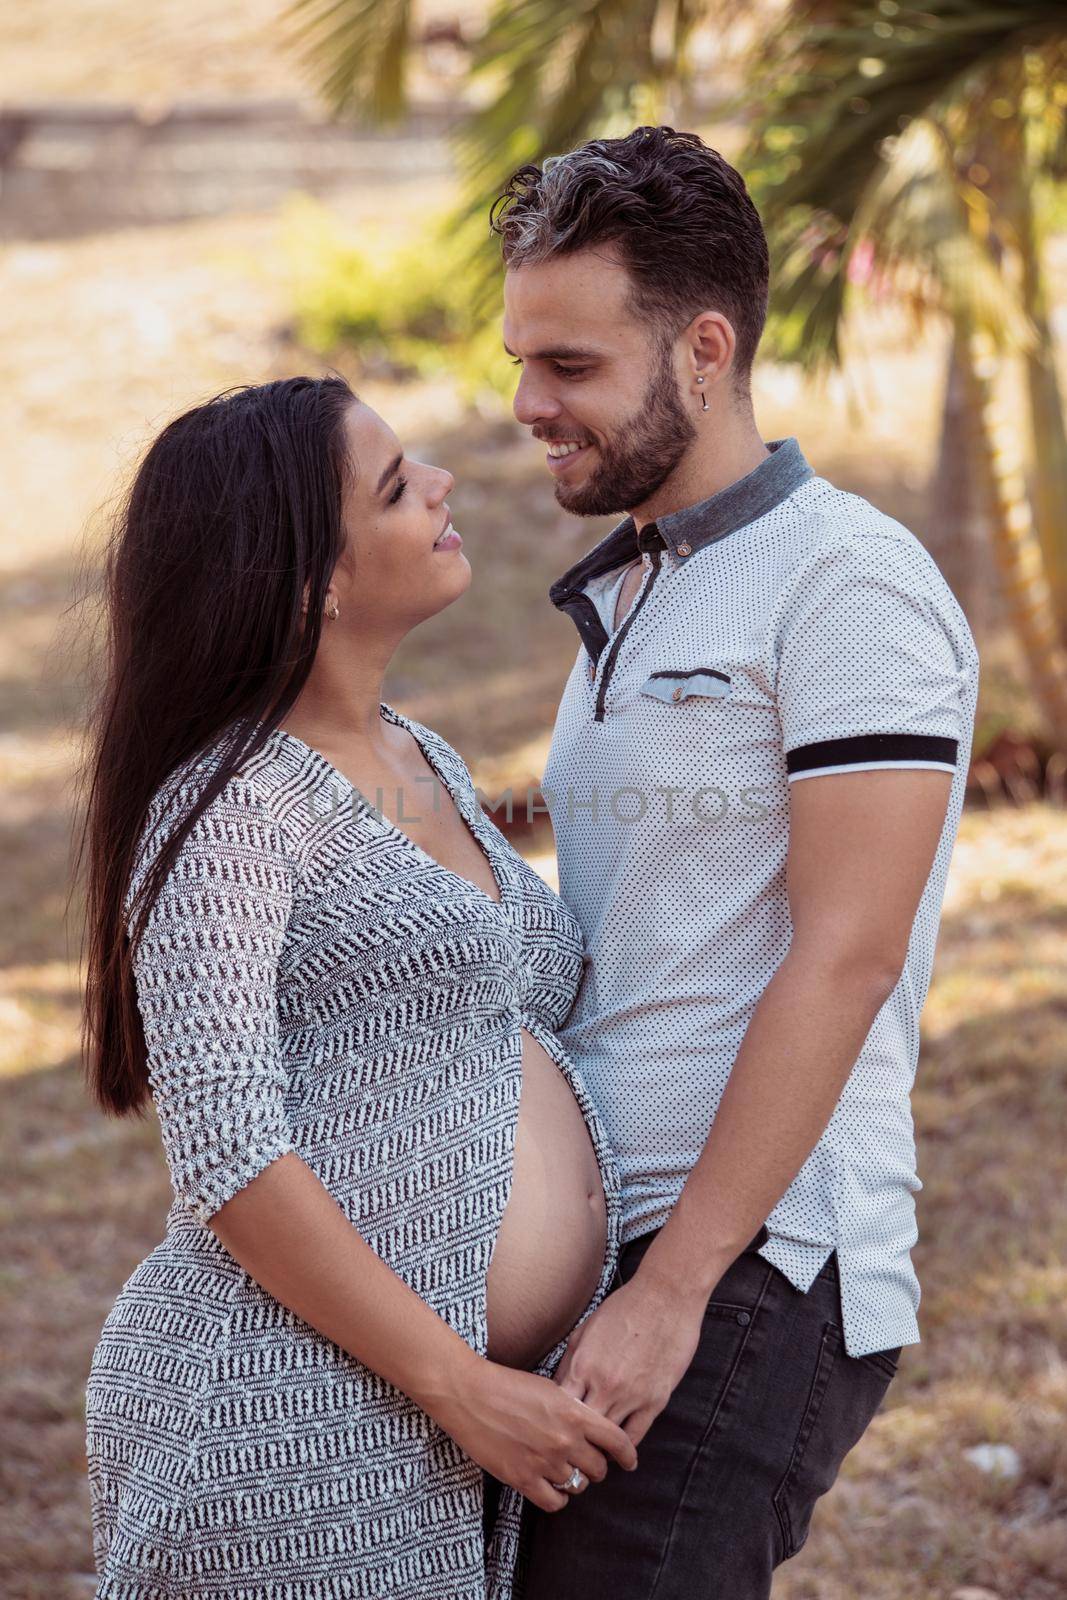 Photo of a young couple, the girl is pregnant